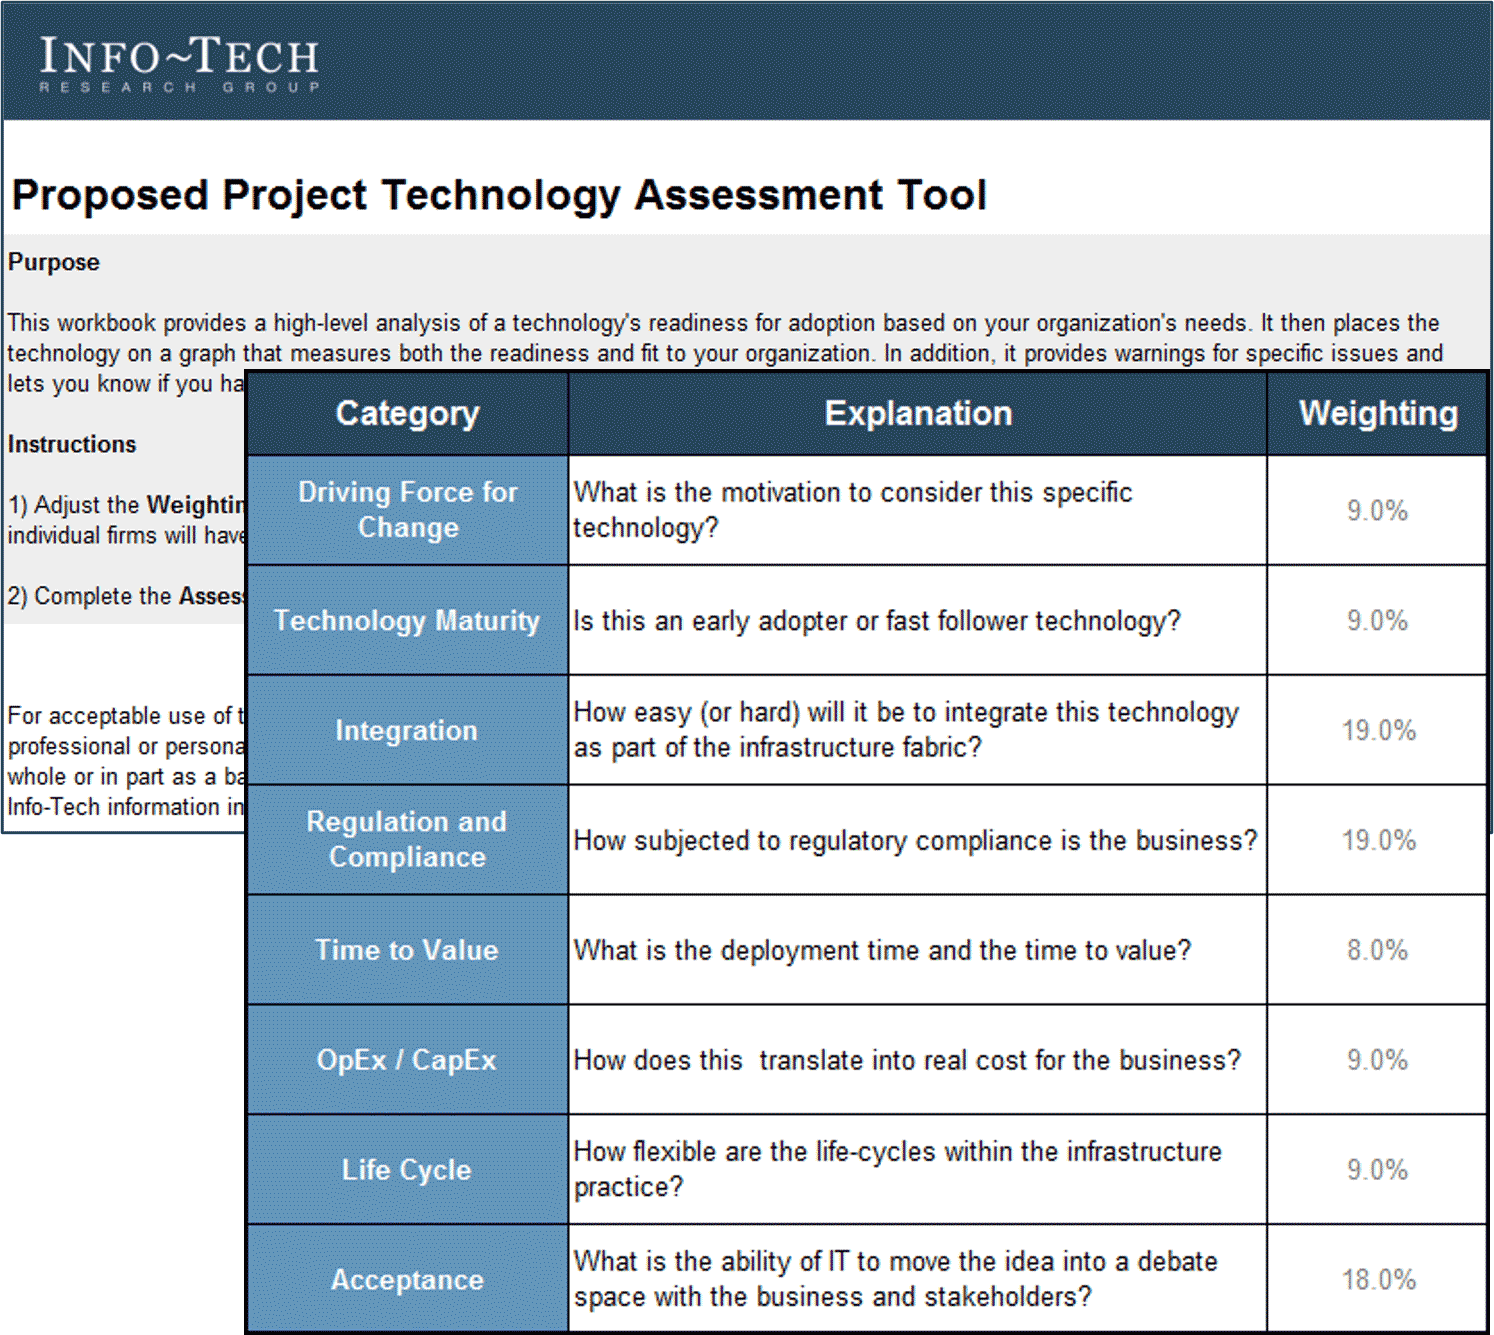 A screenshot of Info-Tech's Proposed Project Technology Assessment Tool is shown.